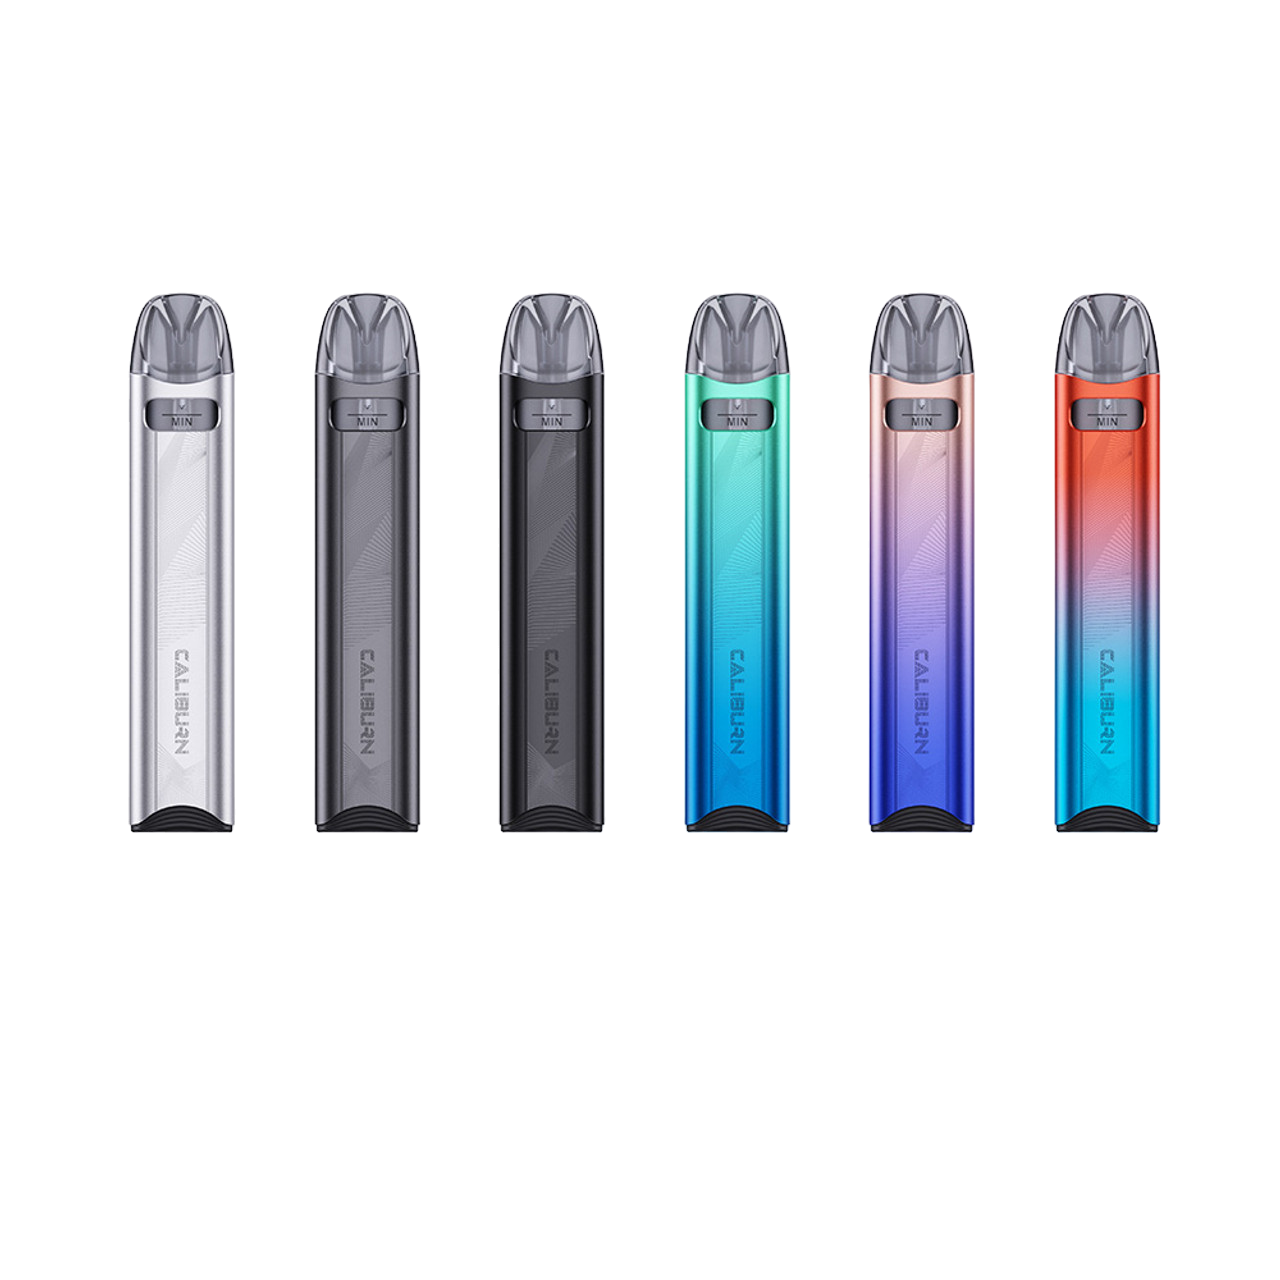 Uwell Caliburn A3S 520mAh Pod System Starter Kit With 2 x Refillable 2ML Caliburn A3S Pods